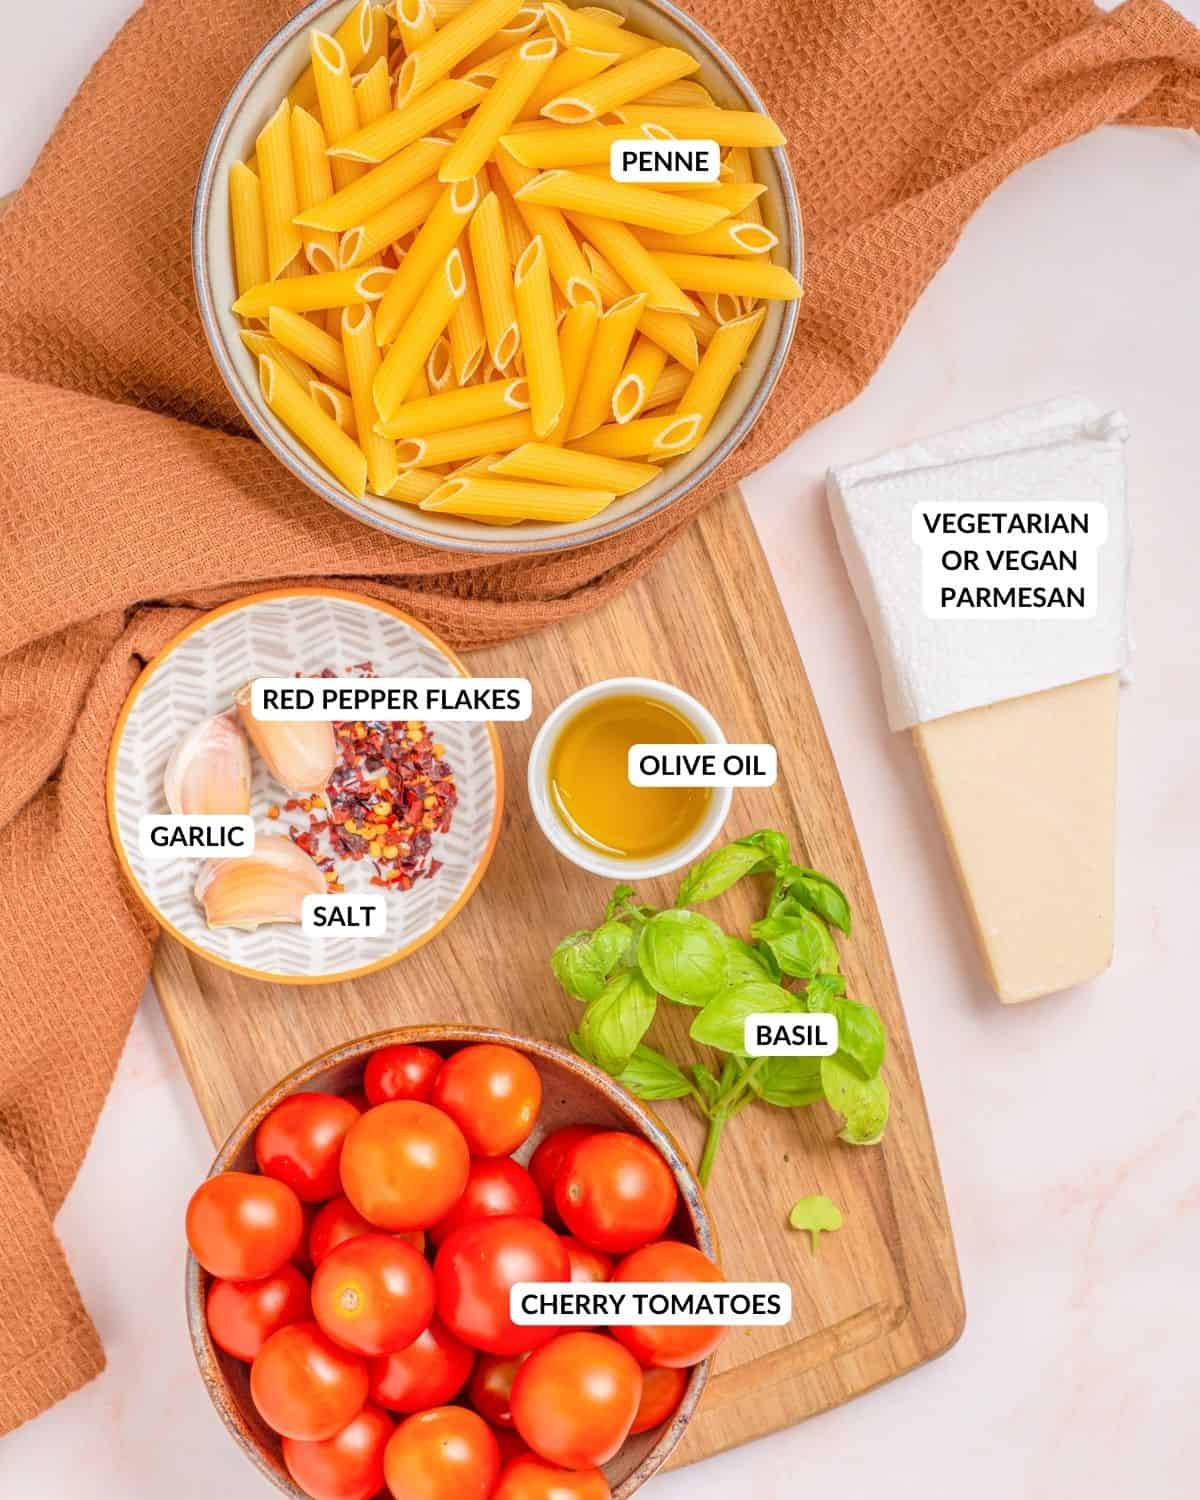 Overhead view of labeled ingredients for penne pomodoro - check recipe card for details.